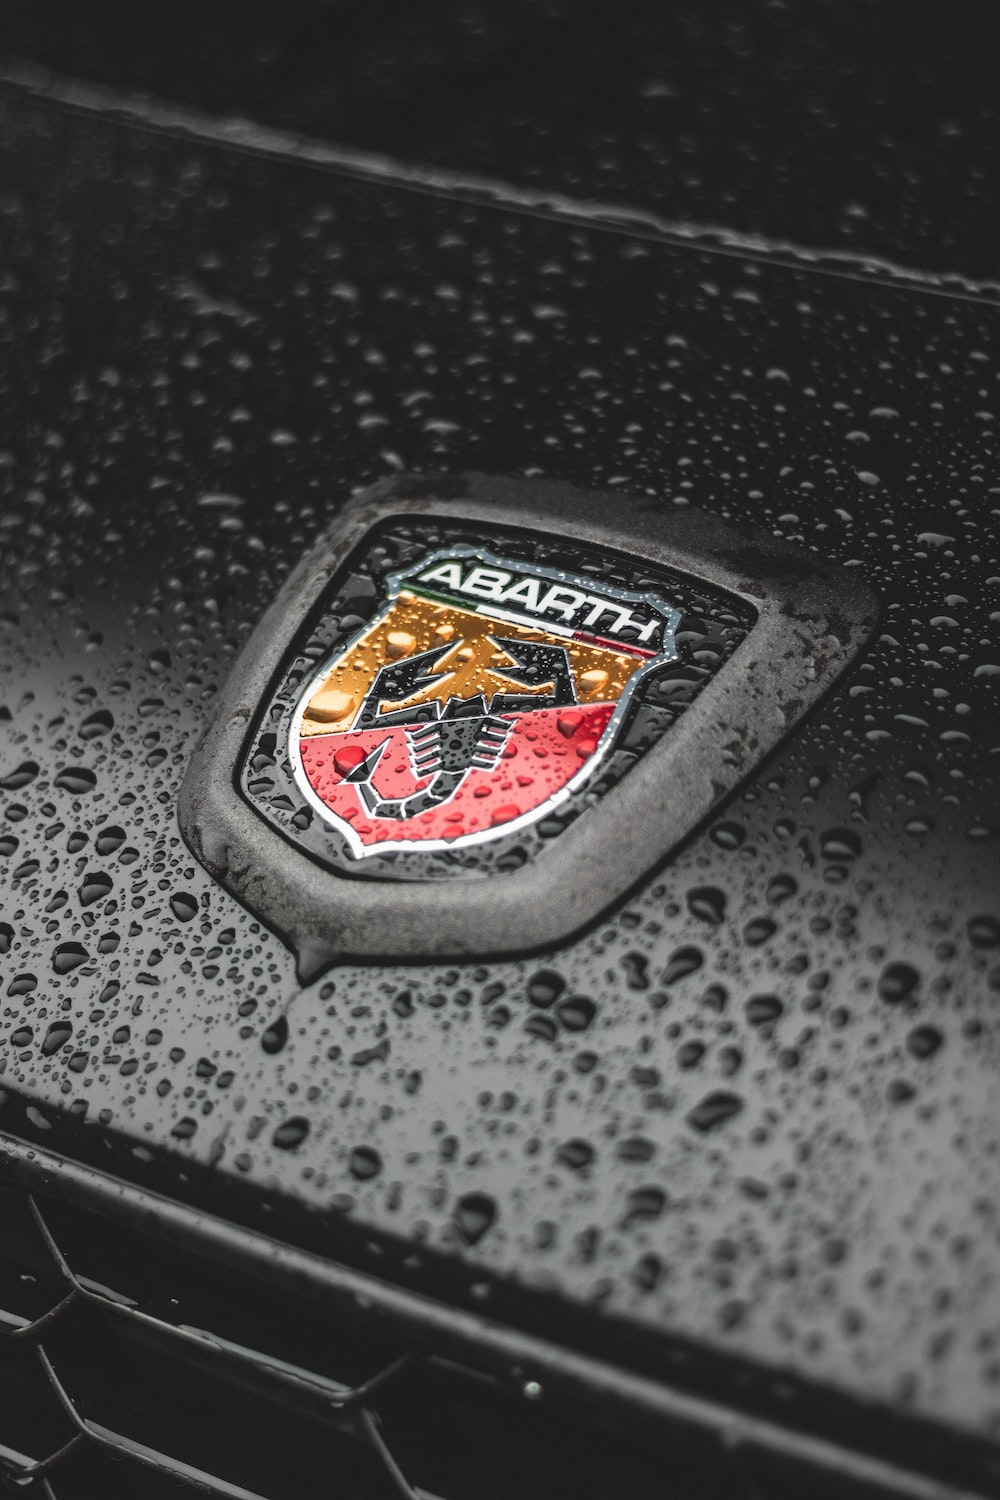 Abarth pictures download free images on